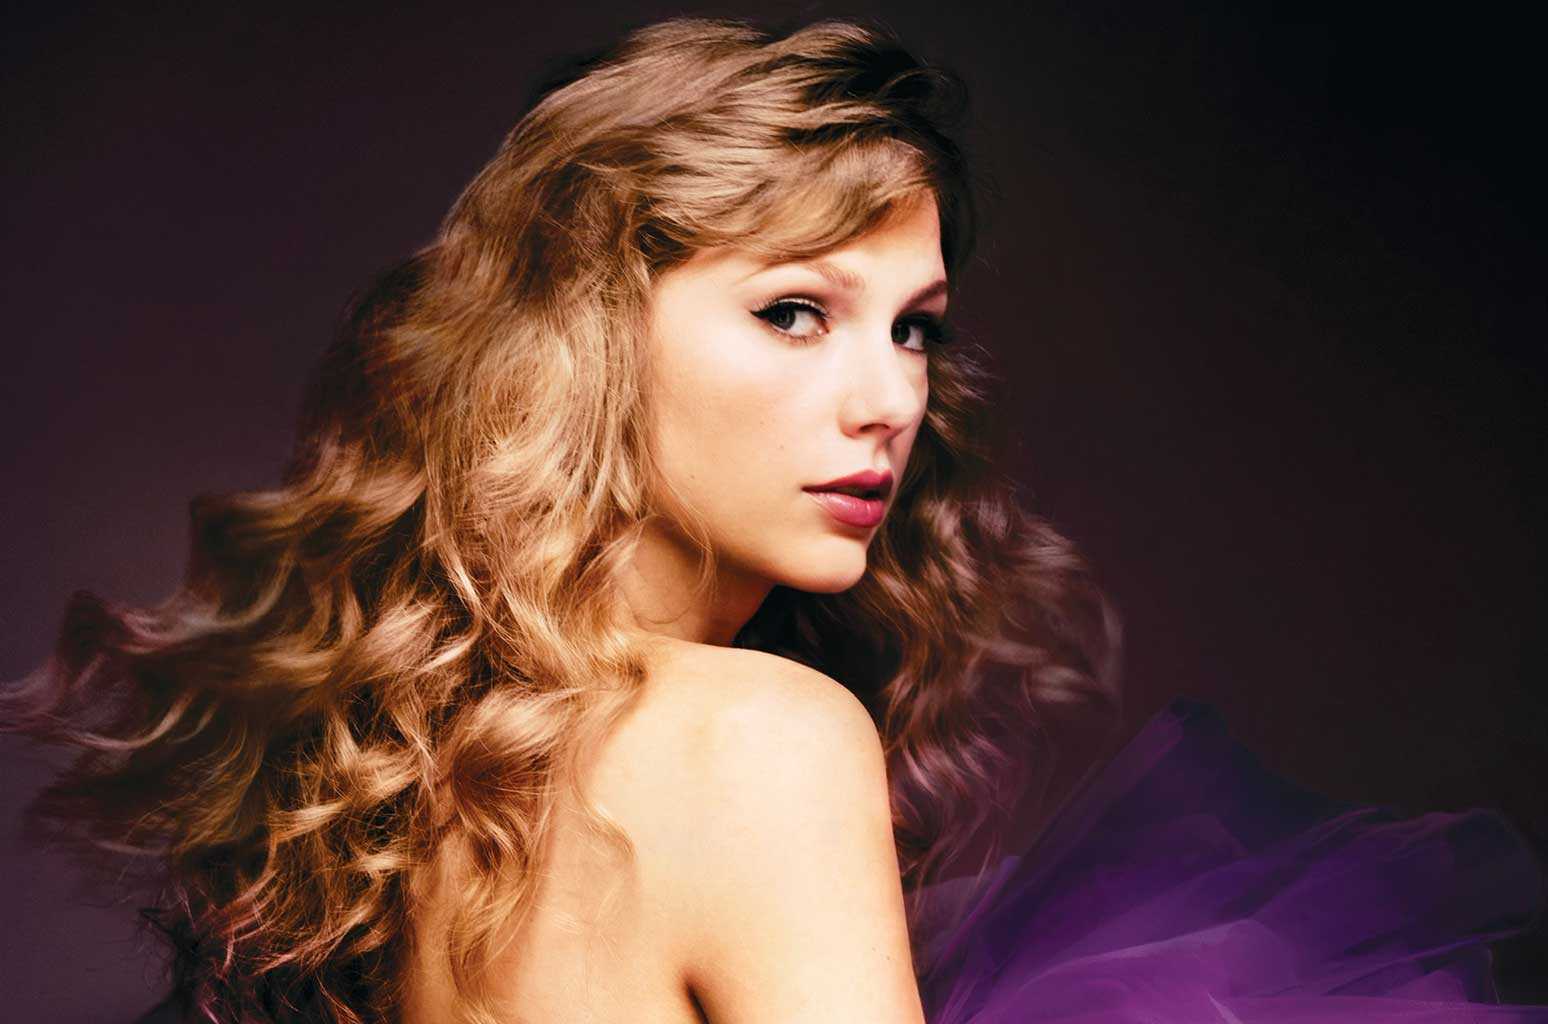 "Really can’t contain my excitement," Swift announces 14 new shows on her eras tour amidst speak now release buzz